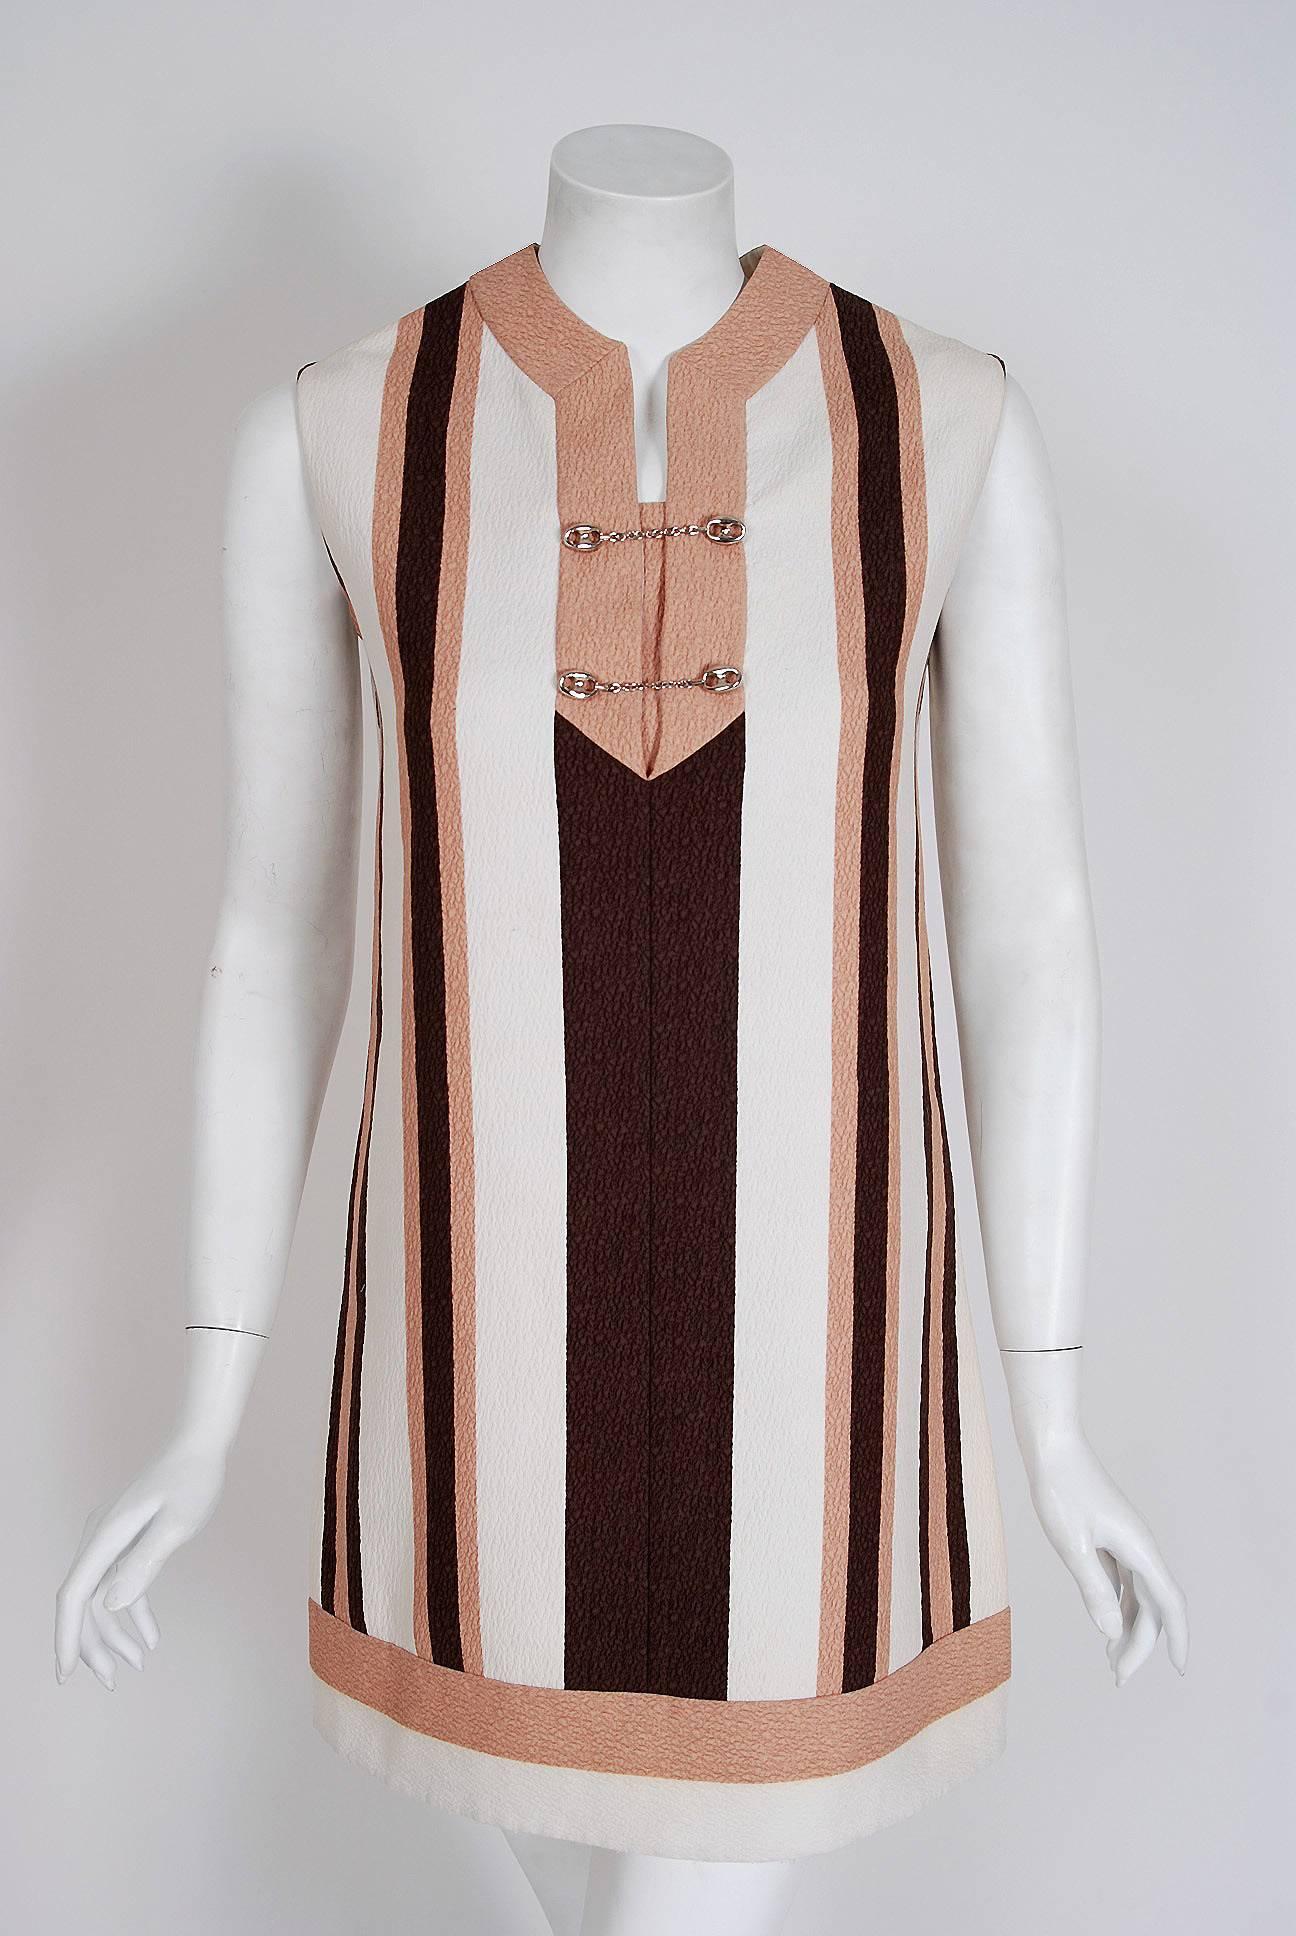 Earlier Gucci garments are very hard to come by and this mini dress is breathtaking! Perfect for any upcoming event; you can't help but feel ultra chic in this couture beauty. The dress is fashioned from fully-lined ivory, pink and brown striped